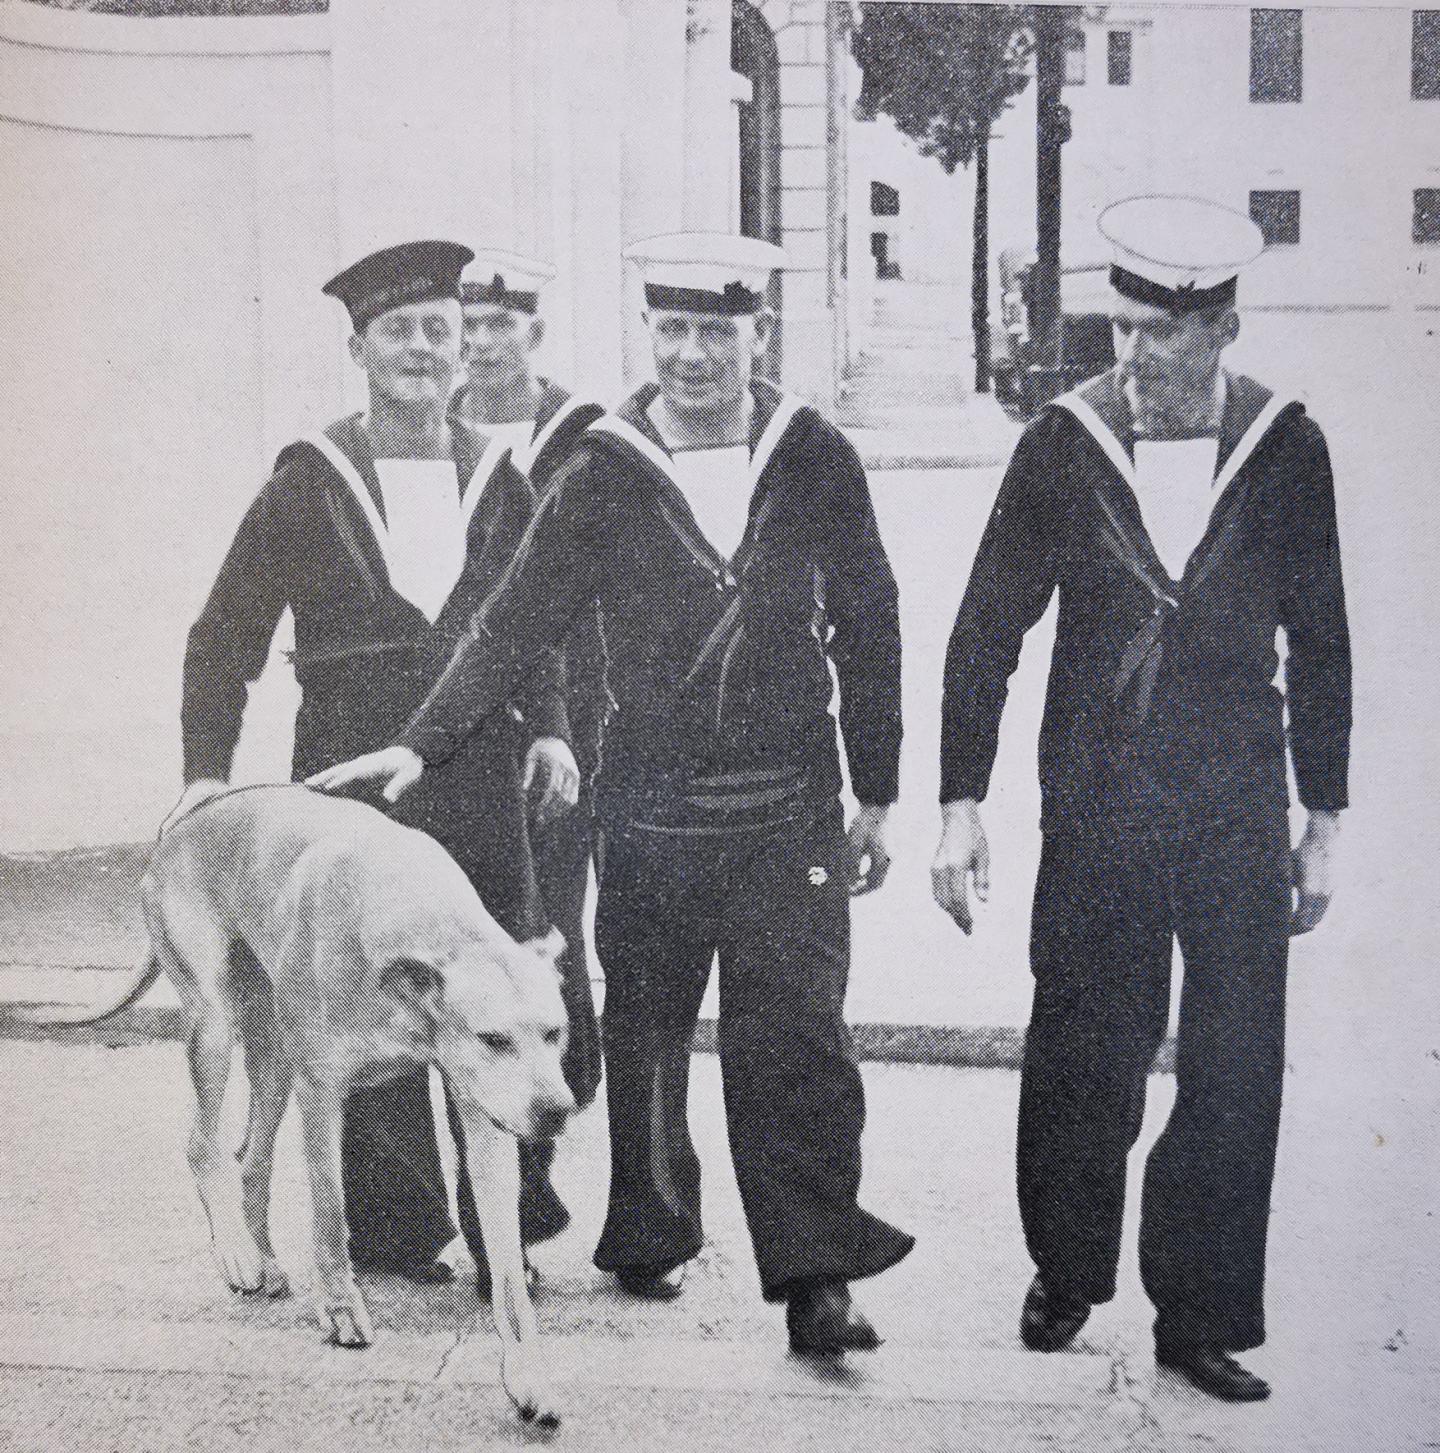 Nuisance walking with a group of sailors